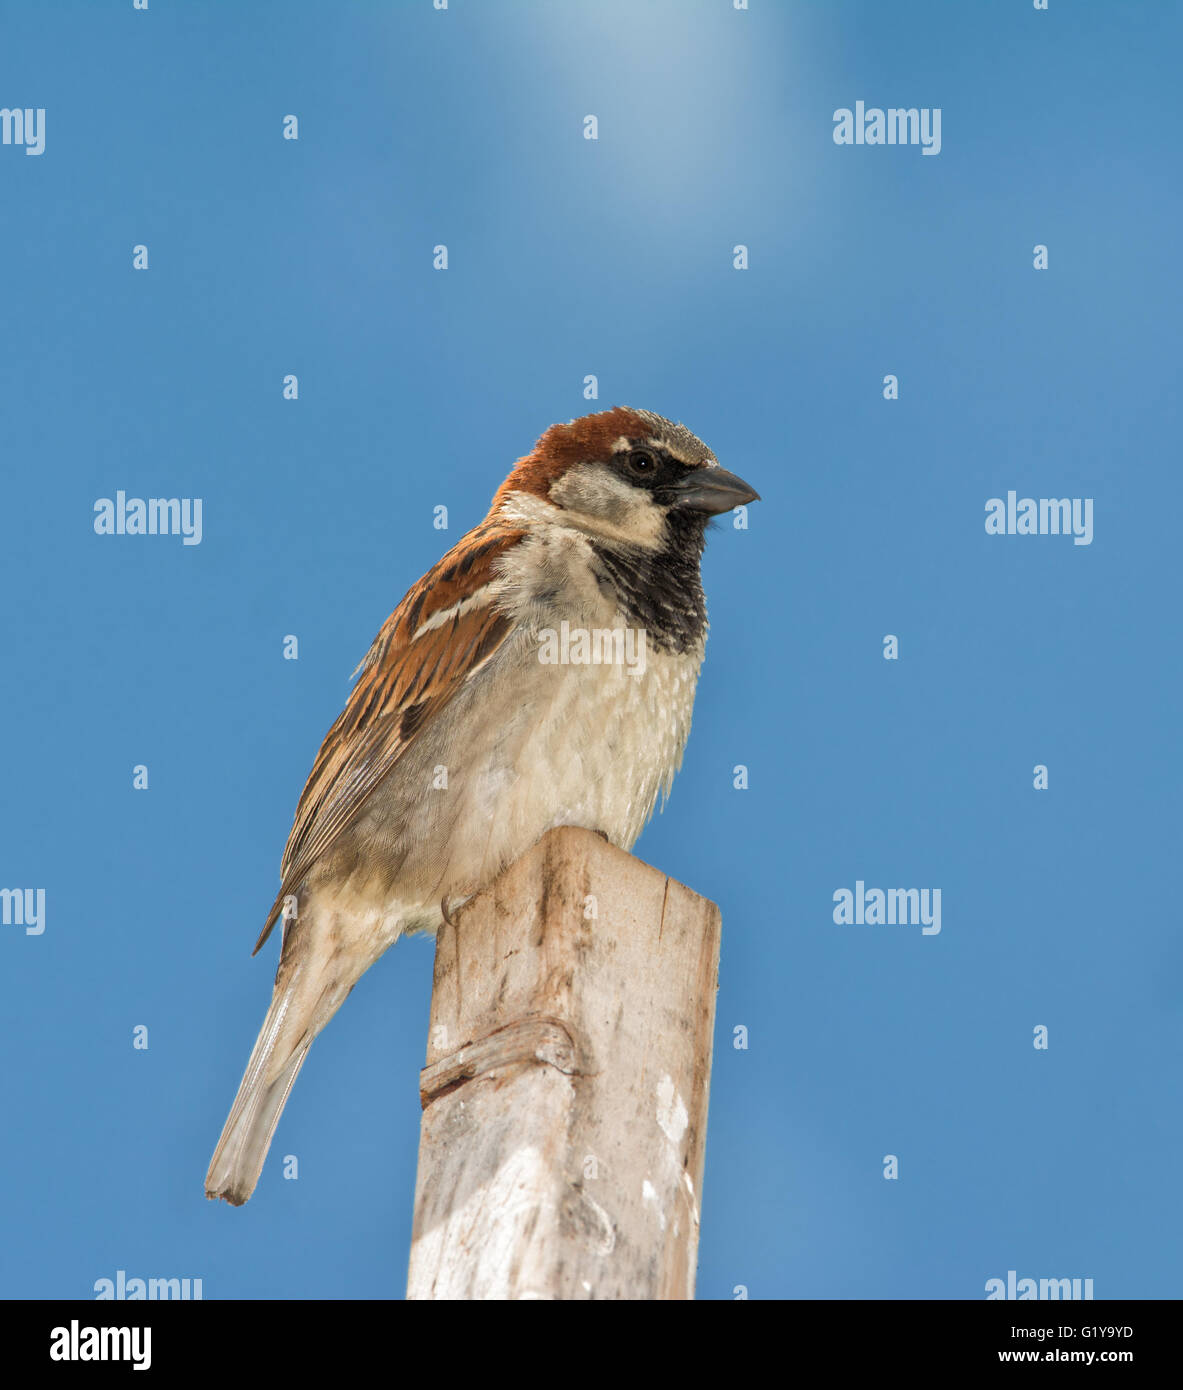 Male House Sparrow, Passer domesticus, perched on top of a stick against sunny blue sky Stock Photo